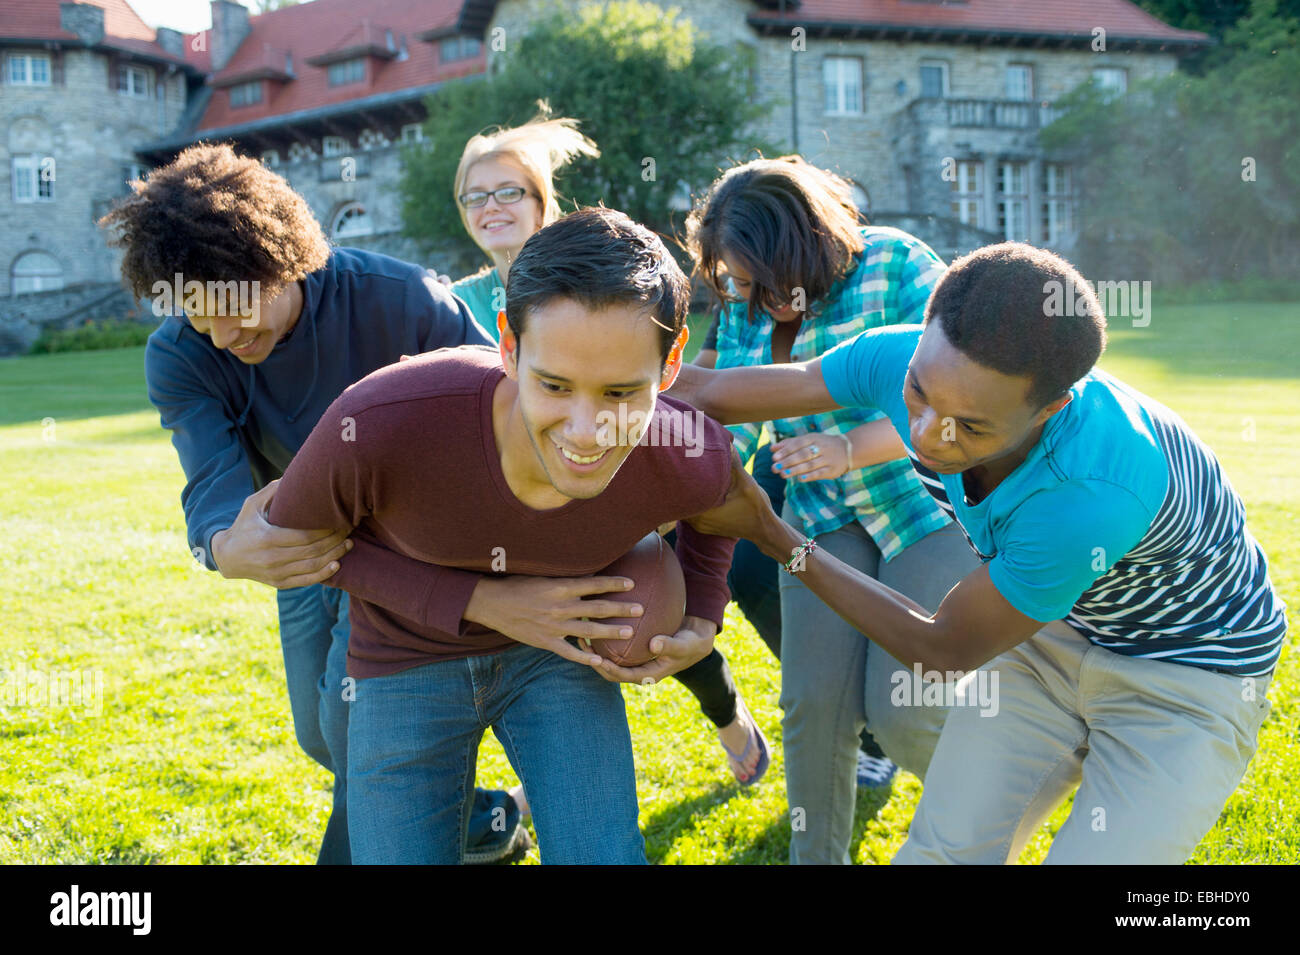 Students playing American football Stock Photo